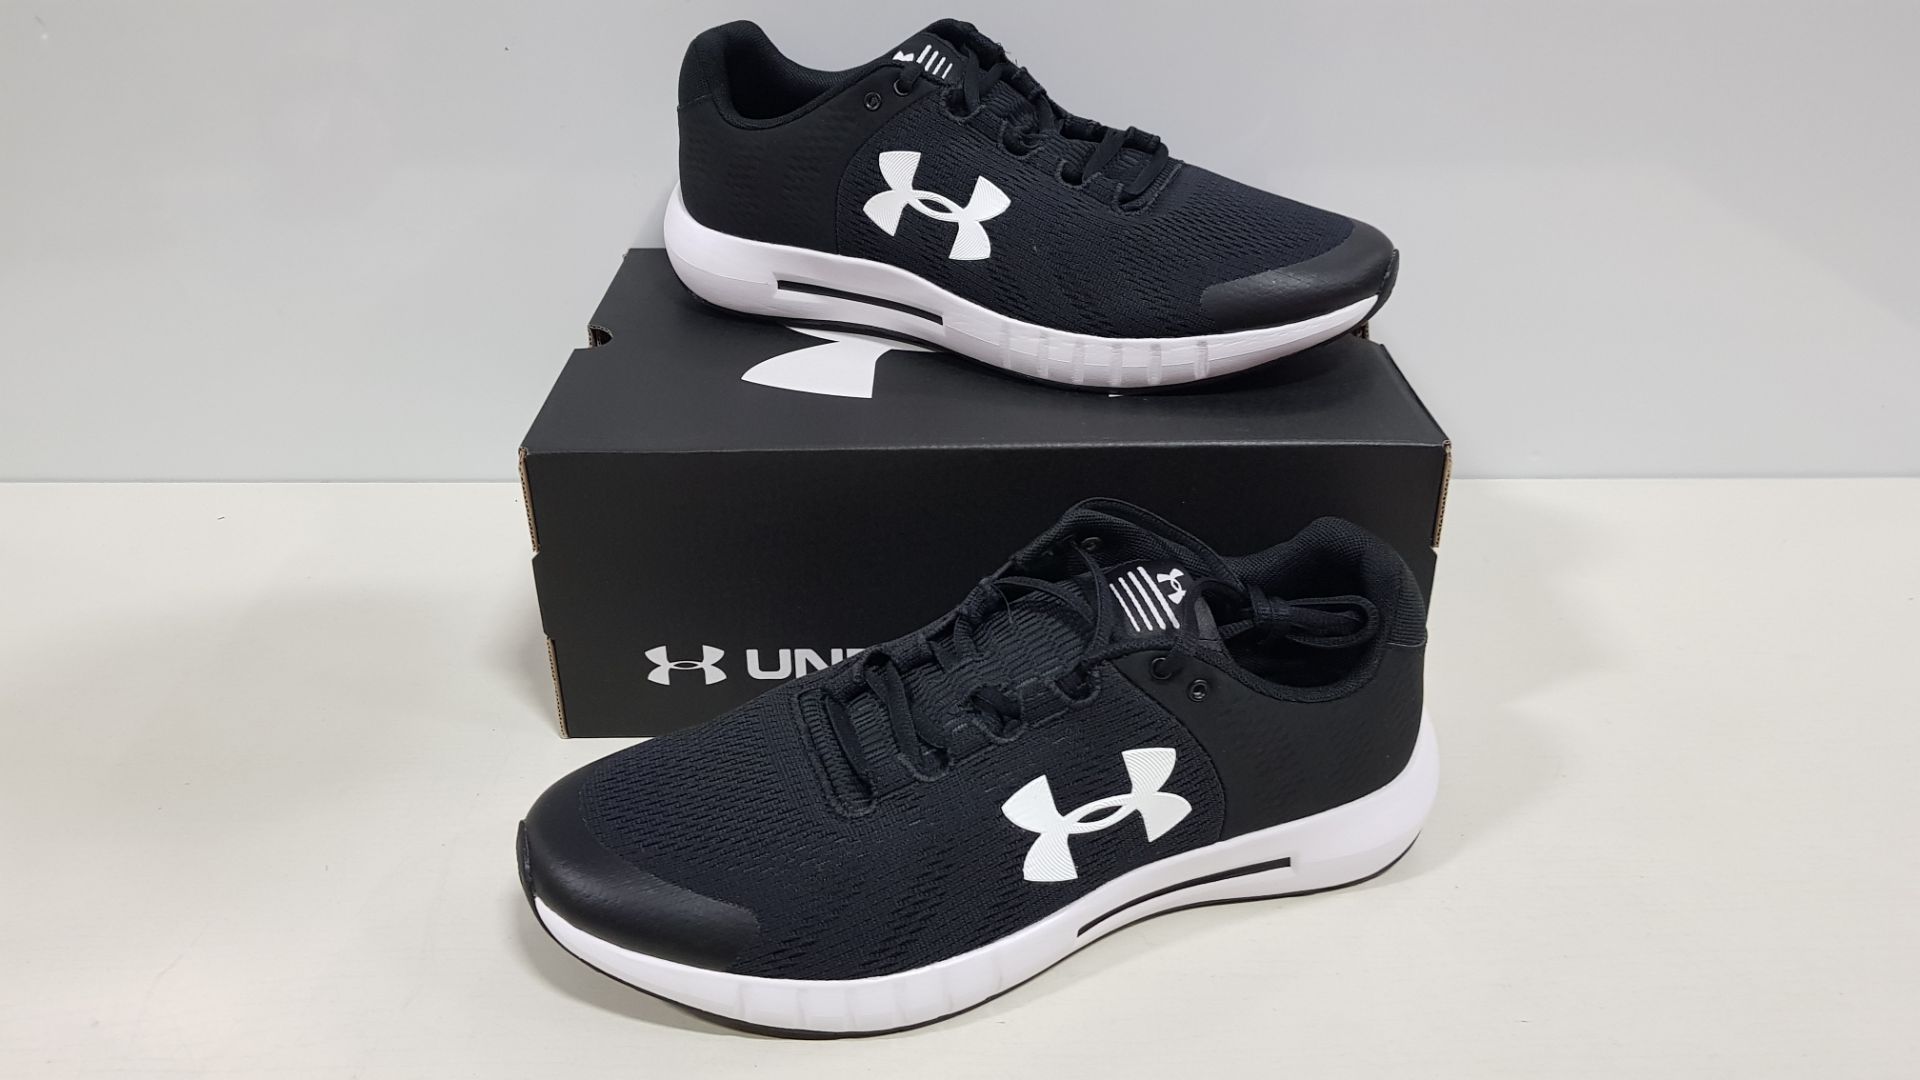 7X BRAND NEW UNDER ARMOR MICRO G PURSUIT IN BLACK AND WHITE - SIZE UK 11